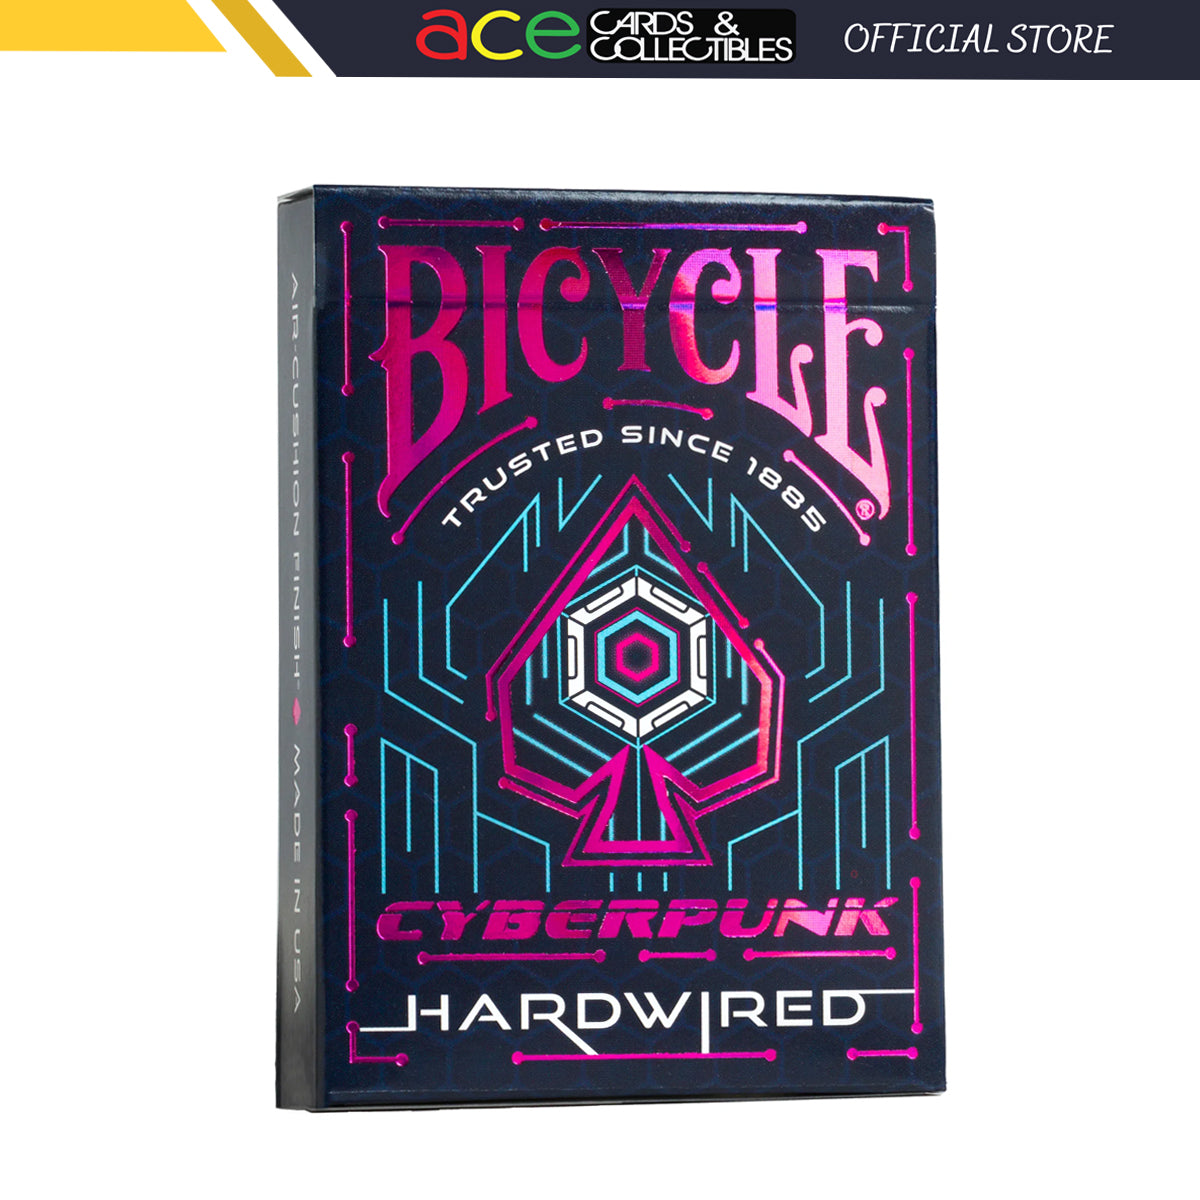 Bicycle Cyberpunk Hardwired Playing Cards-United States Playing Cards Company-Ace Cards &amp; Collectibles